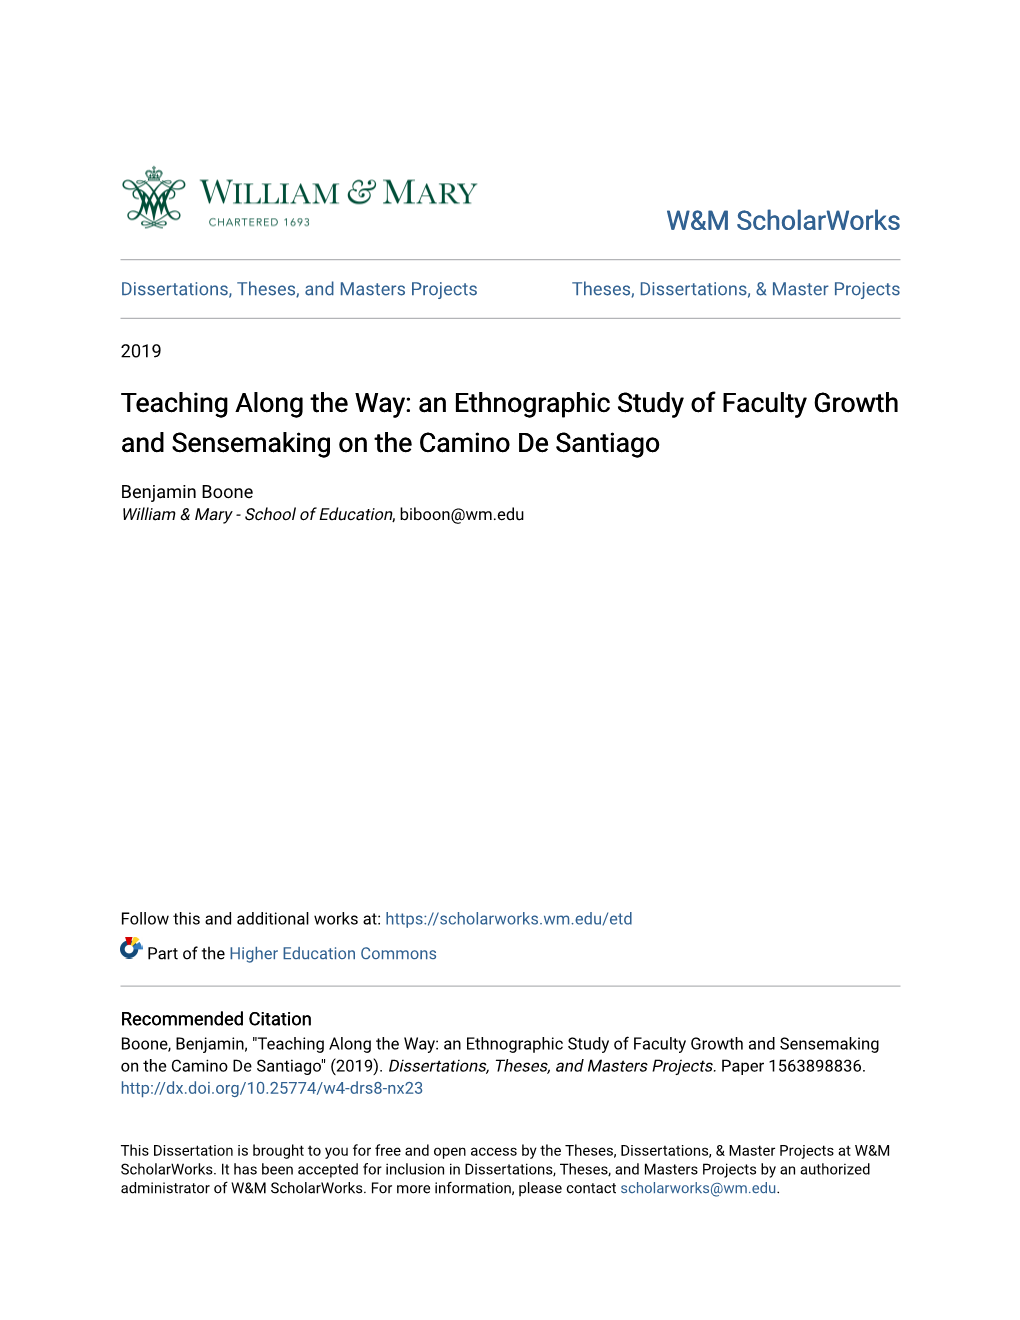 An Ethnographic Study of Faculty Growth and Sensemaking on the Camino De Santiago